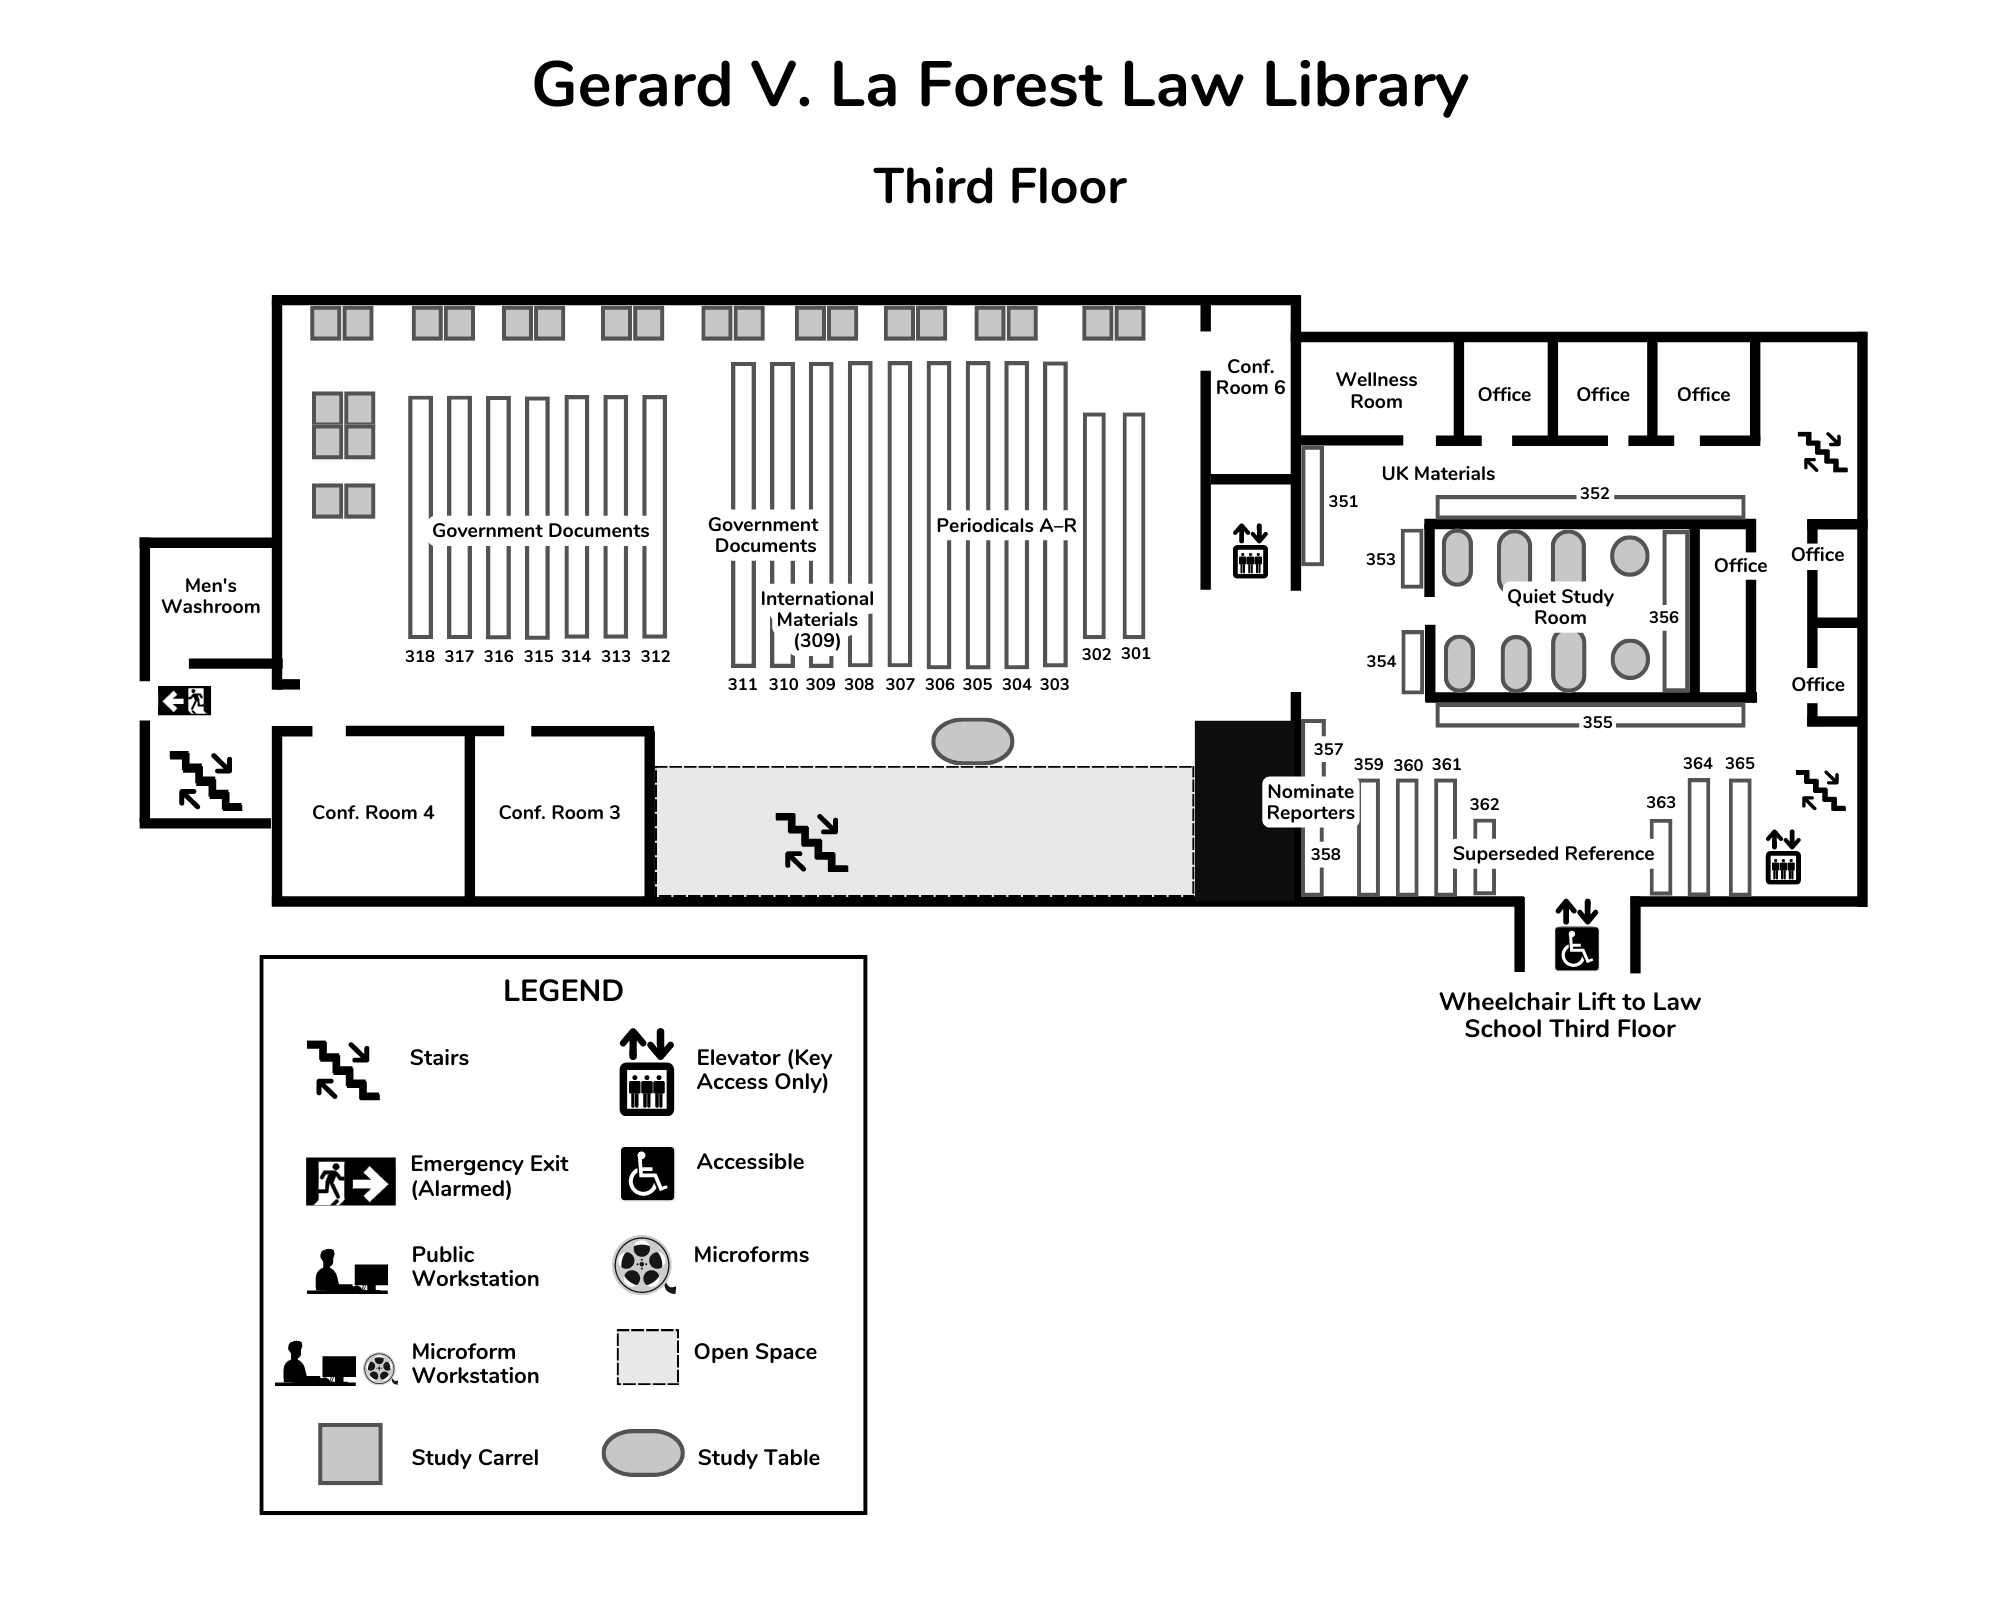 Law Library, Floor3